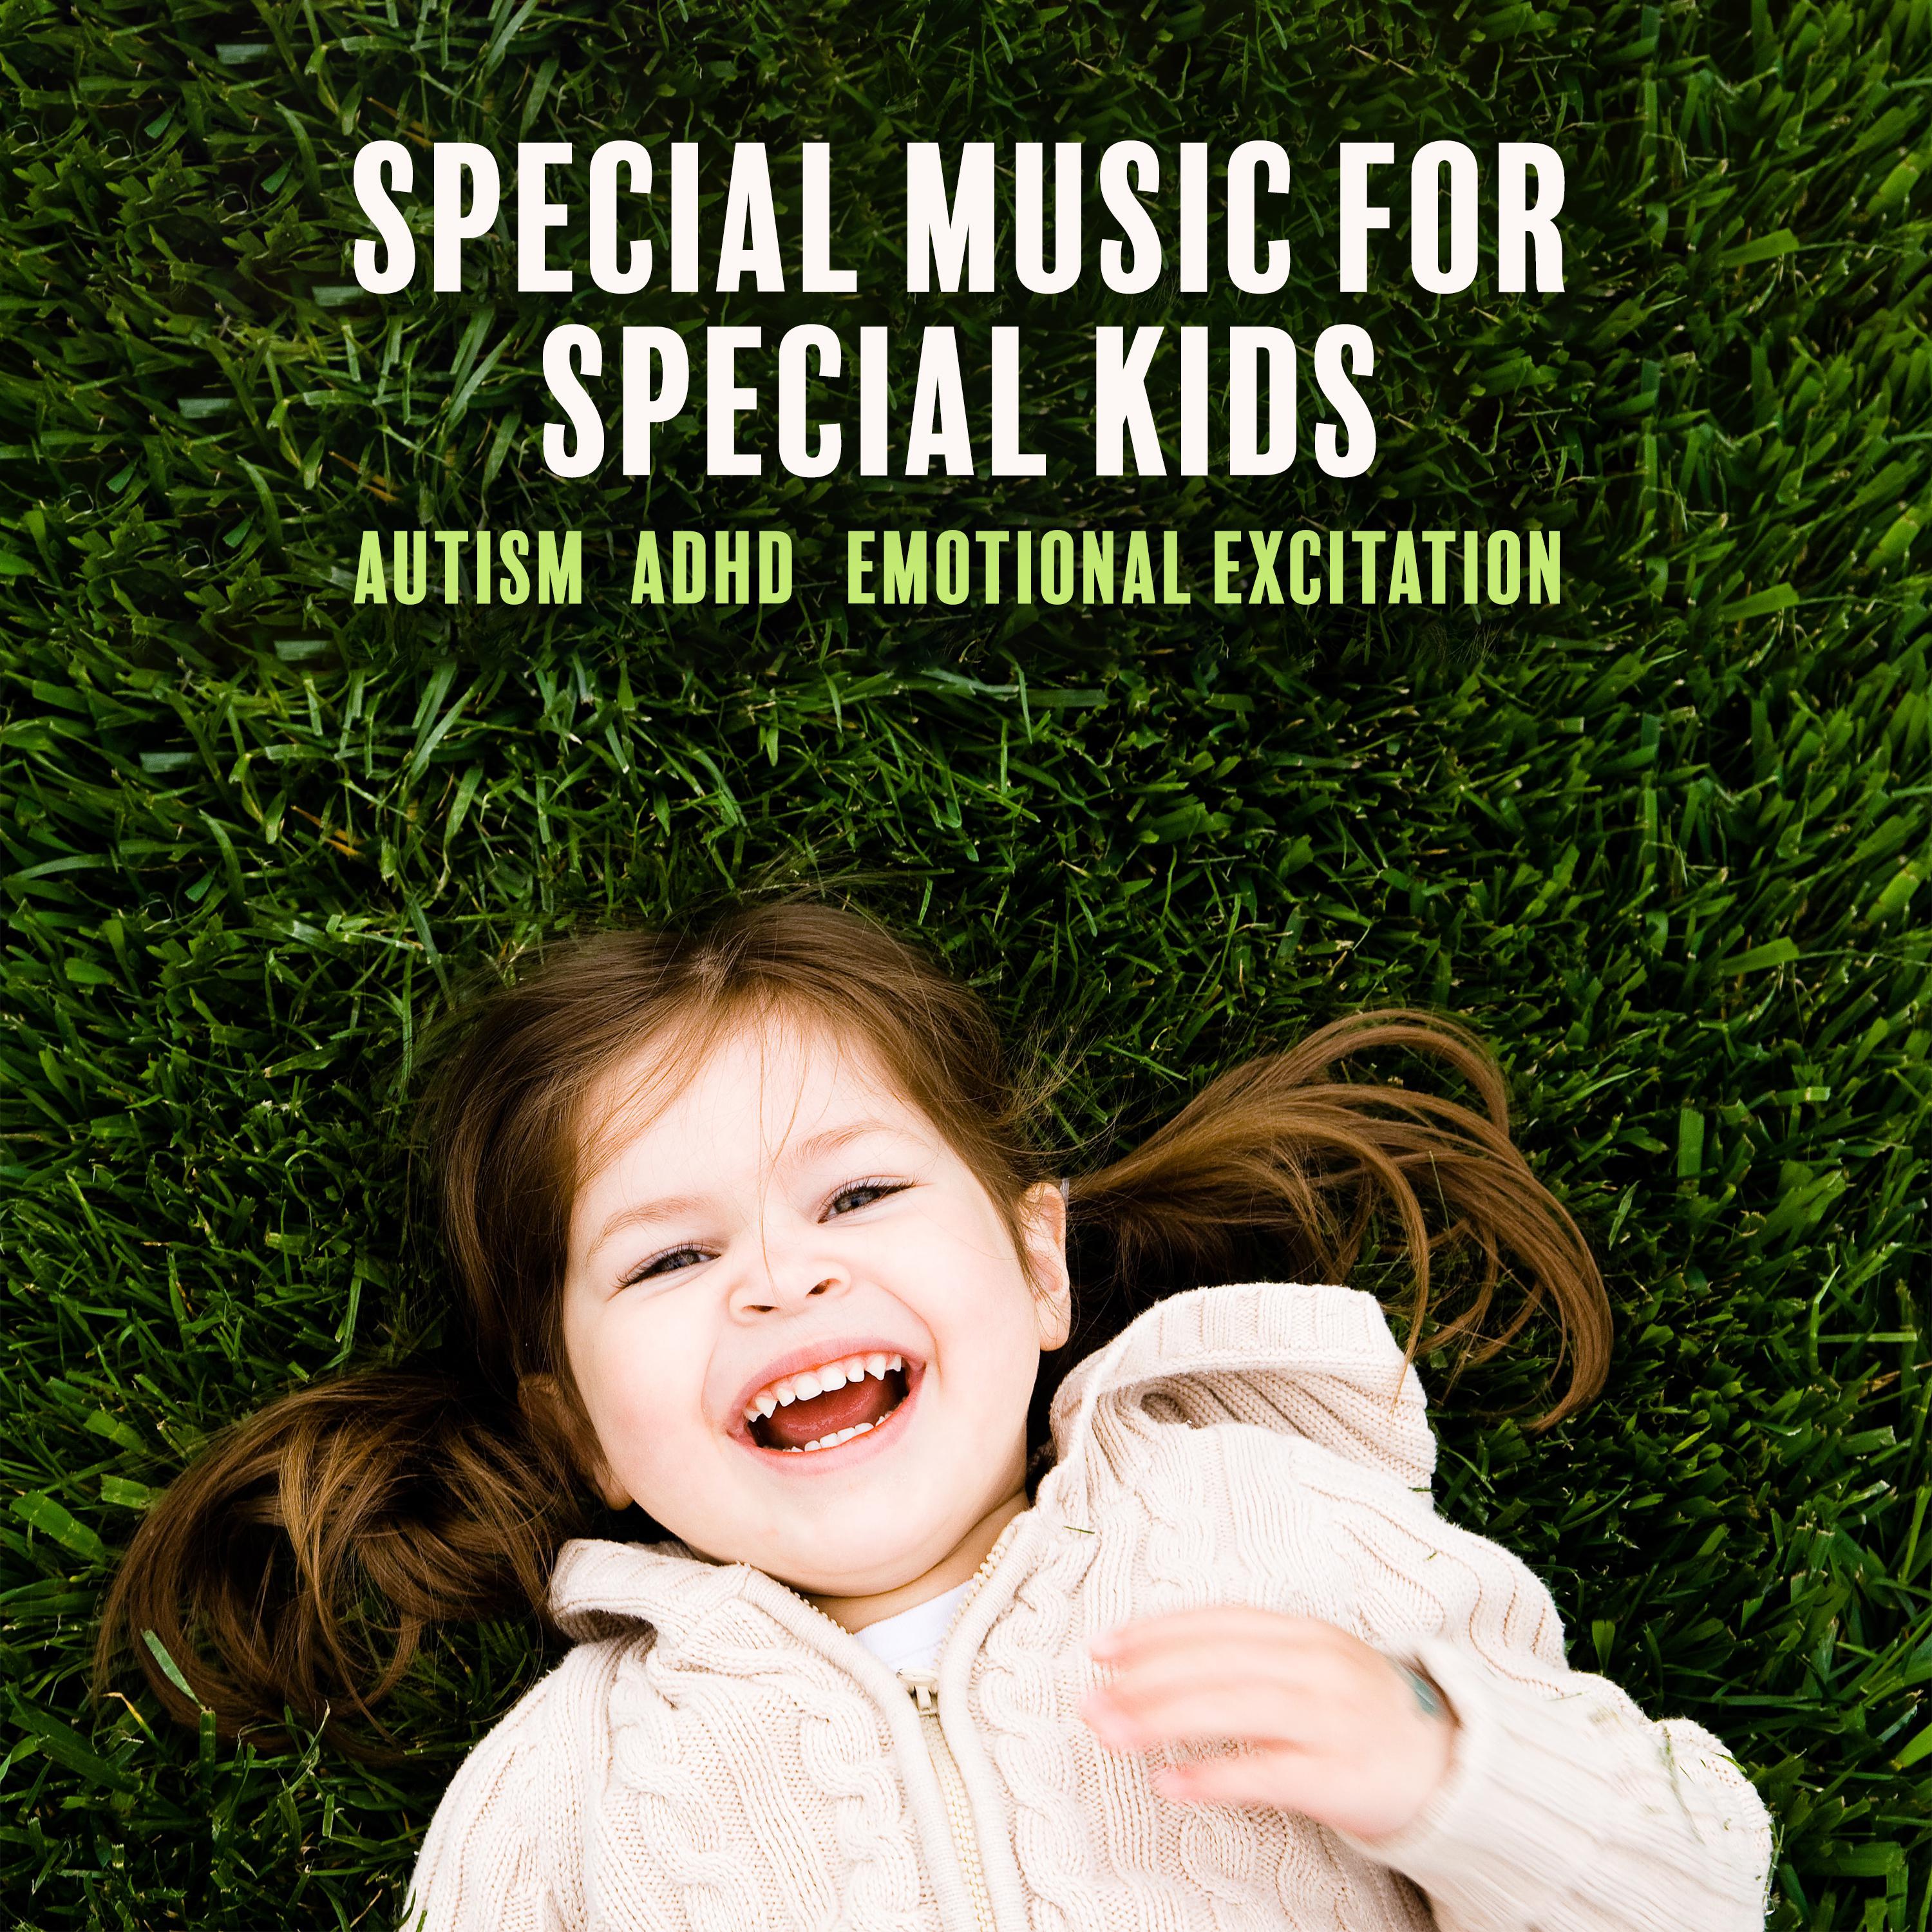 Special Music for Special Kids (Autism, ADHD, Emotional Excitation, Fast Emotional Help, Developing Music, Calm Your Child, Soothing Water, Noise and Instruments)